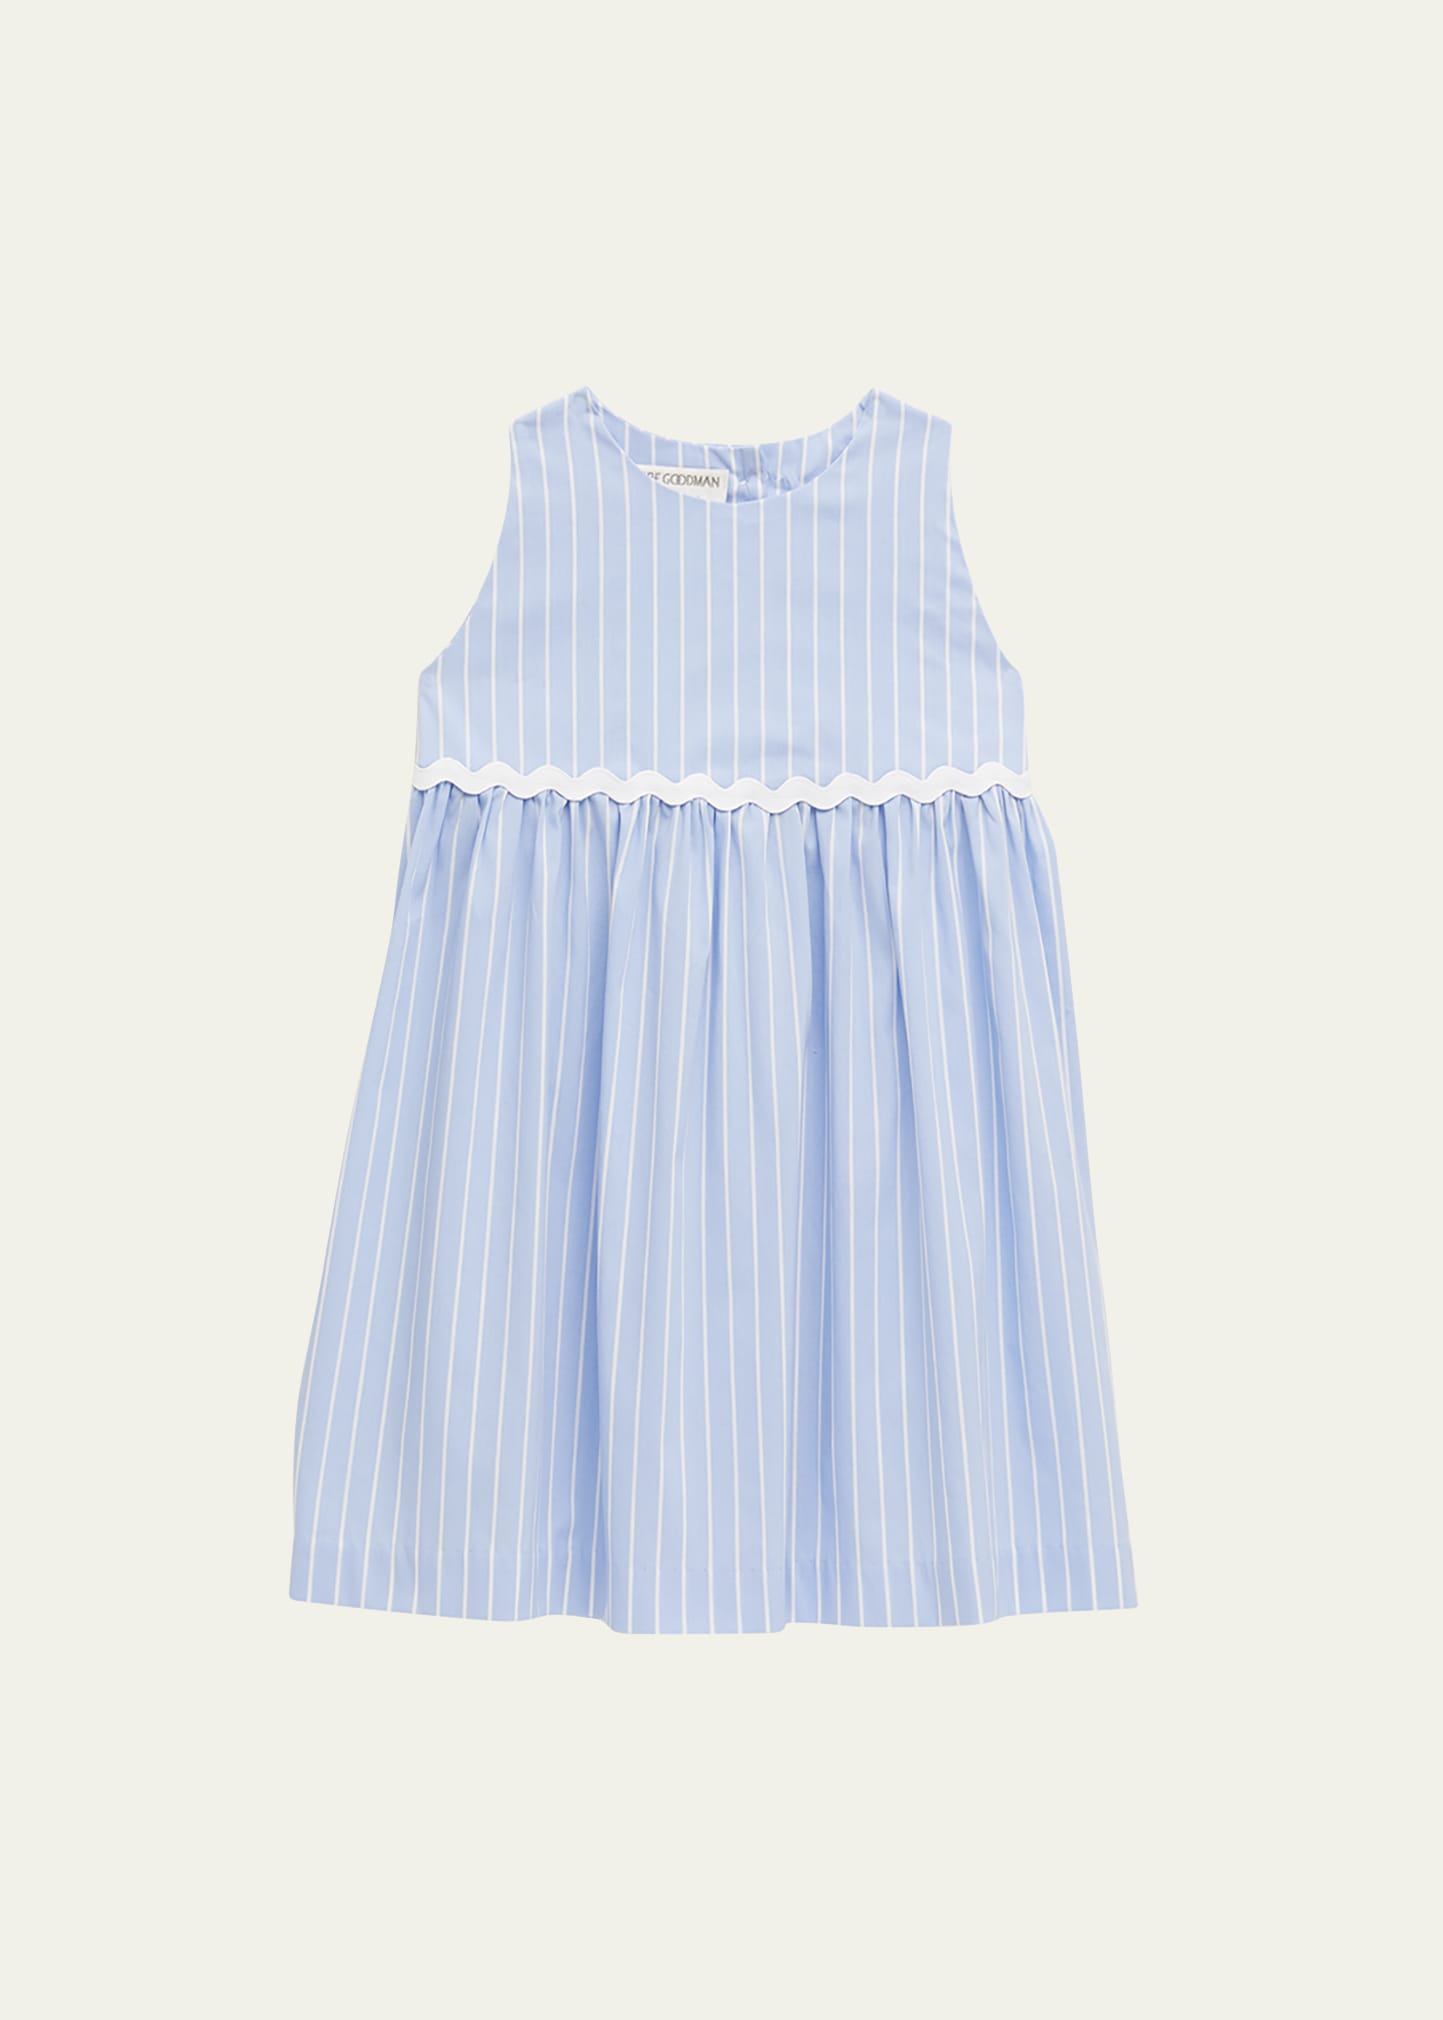 Girl's Pinstriped Bow-Tie Dress, Size 6M-10